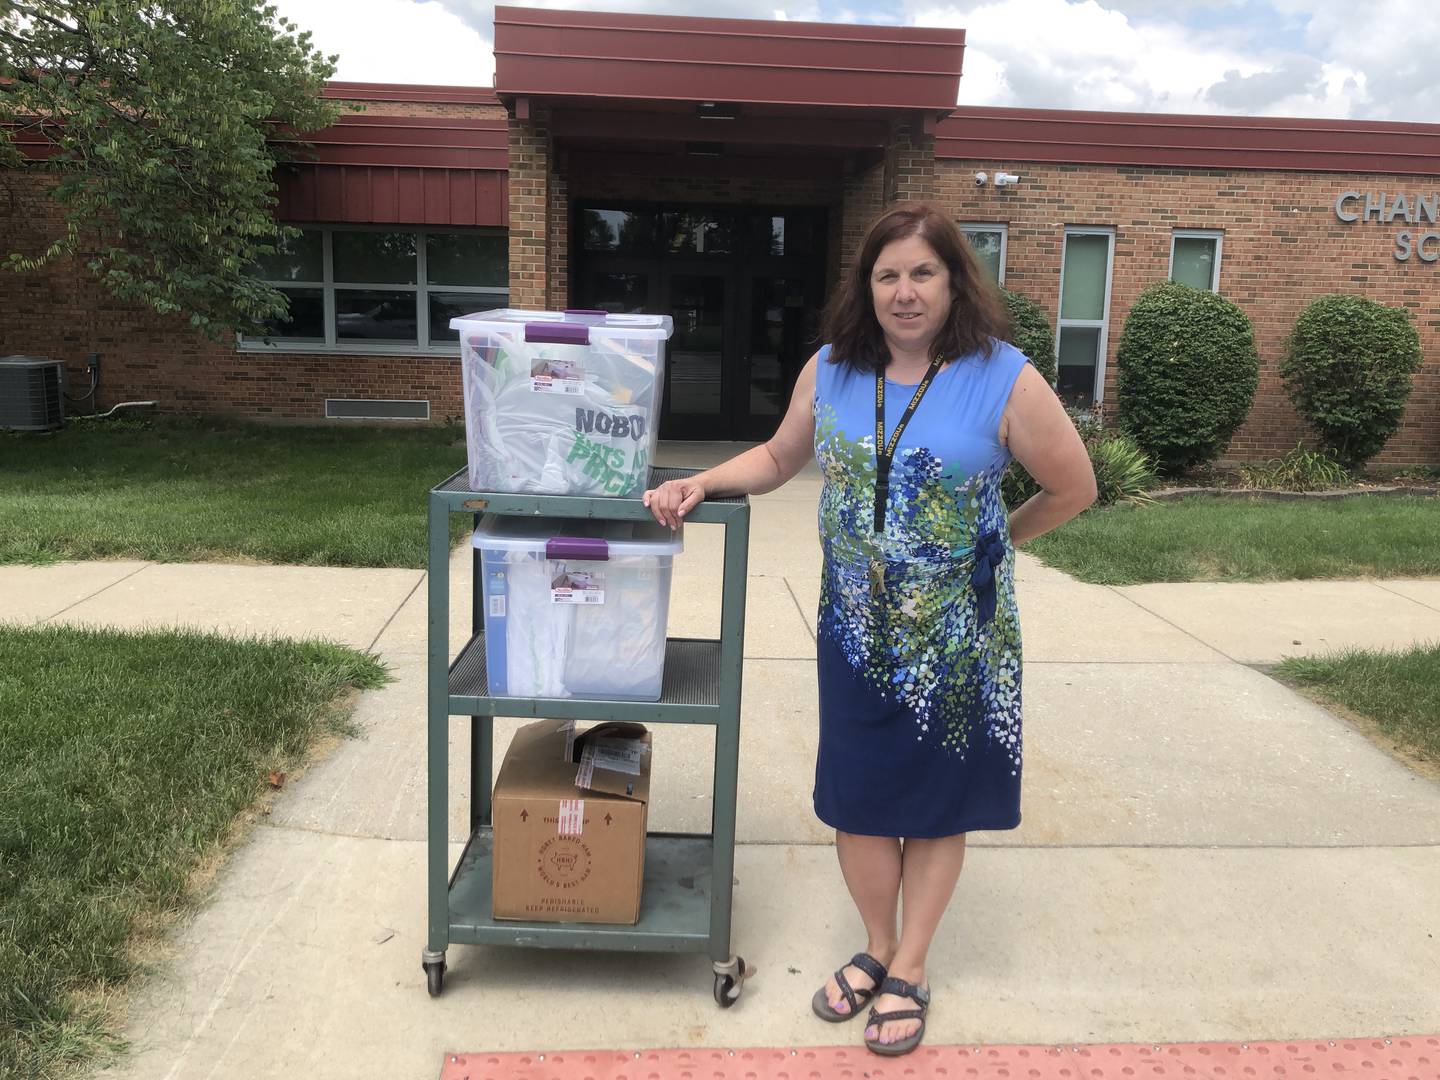 Jackie Hall, principal at Chaney-Monge School District 88 in Crest Hill, receives some of the school supplies that the singles club at Carillon Lakes in Crest Hill collected.